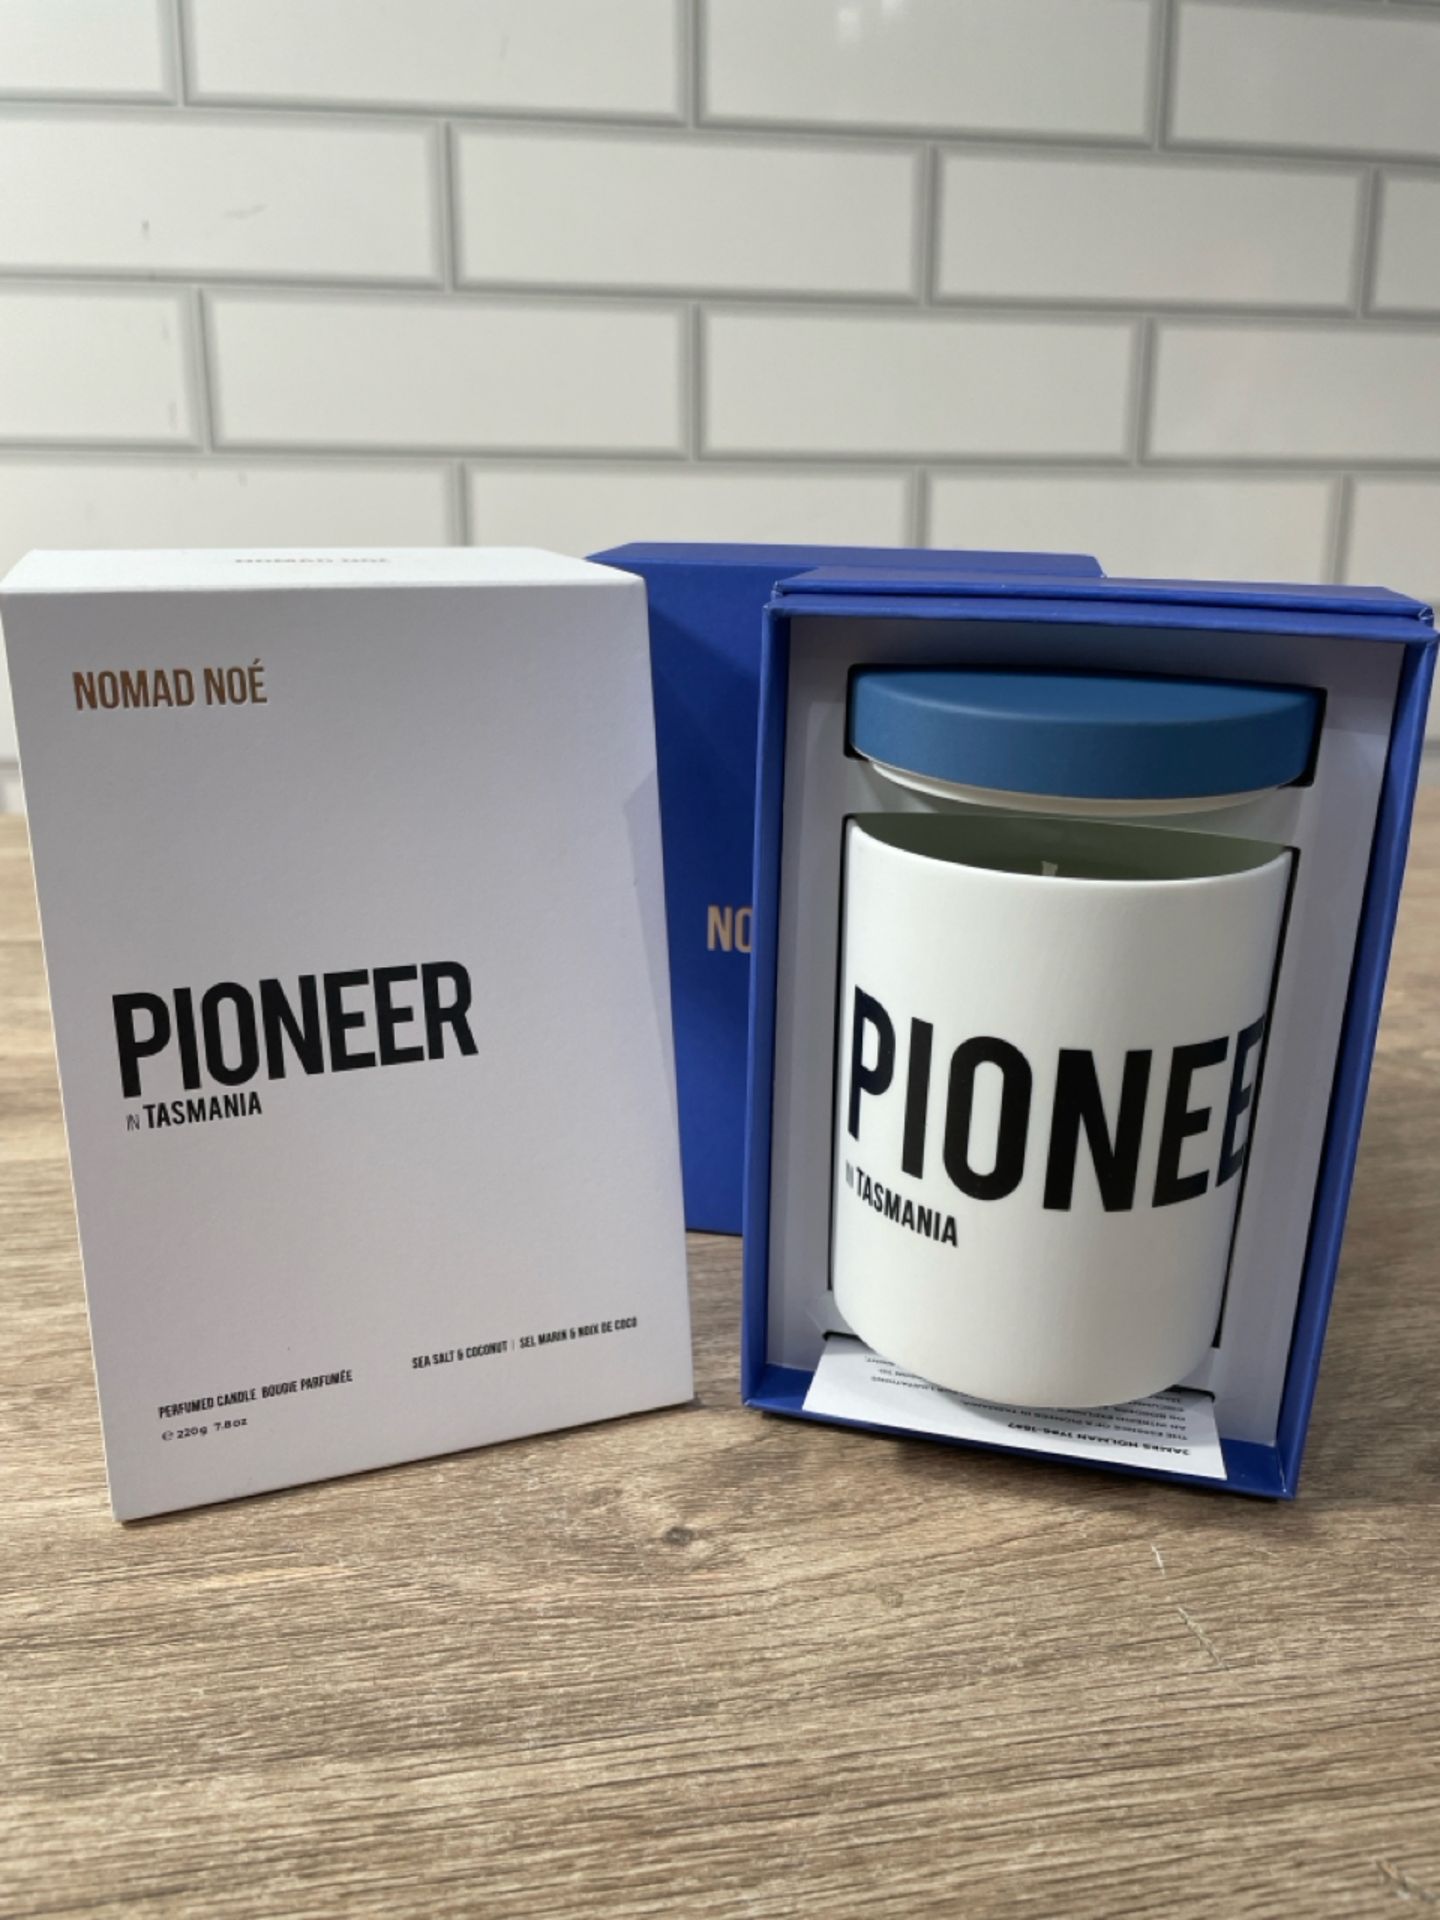 Pioneer Scented Candle from Nomad Noe - Image 2 of 4